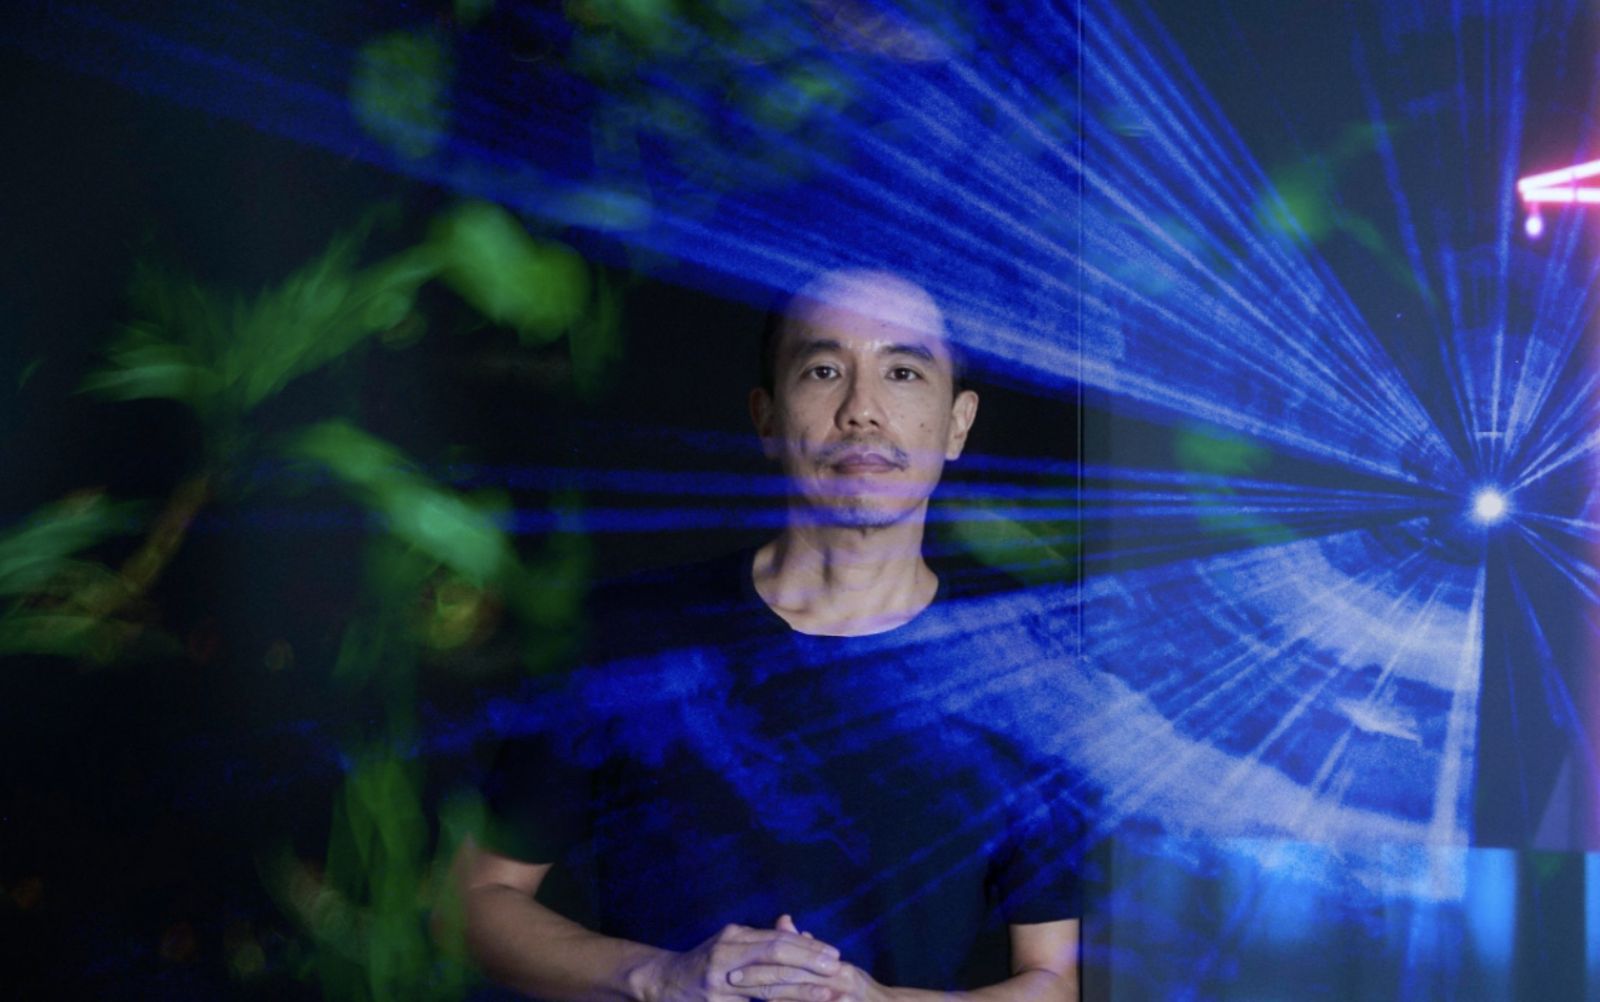 Join Apichatpong Weerasethakul in Mexico for a Filmmaking Workshop This Summer